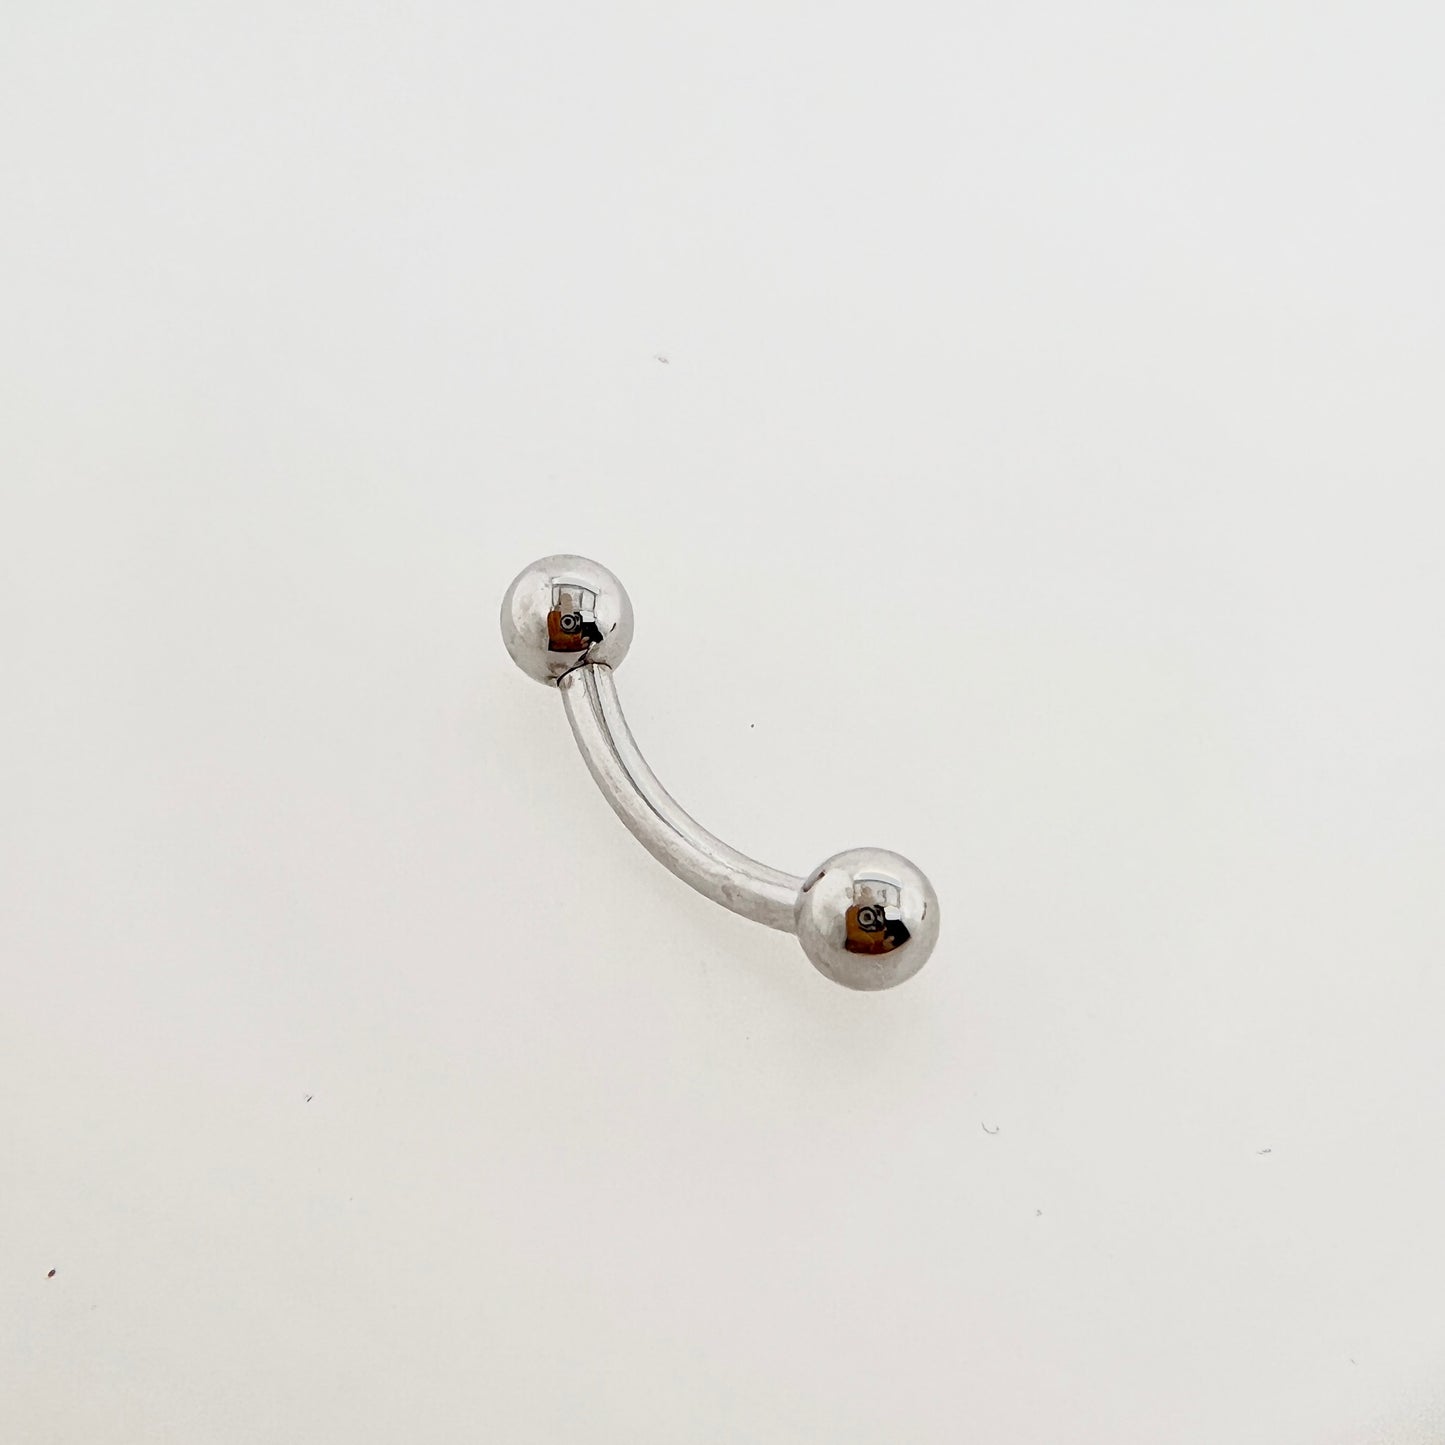 14g Curved Barbell with 5/32" Beads - Threaded